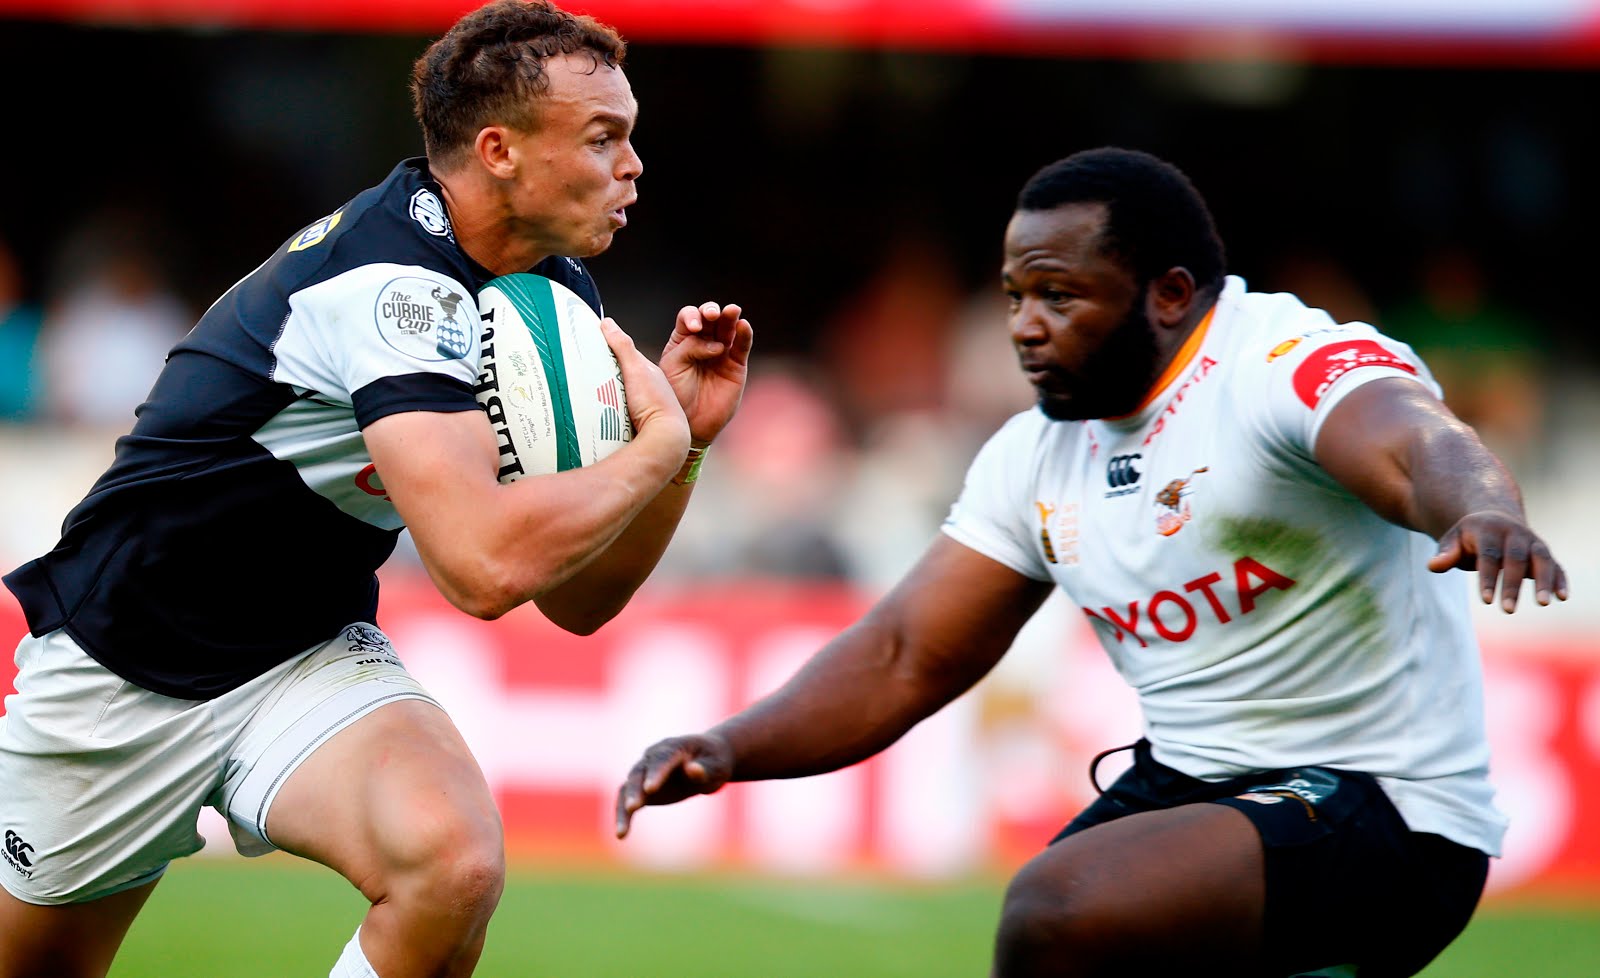 Ox Nche of the Free State Cheetahs looks to tackle Curwin Bosch of the Cell C Sharks during the Currie Cup match between the Cell C Sharks and the Free State Cheetahs at Jonsson Kings Park Stadium in Durban, South Africa 10th August 2019